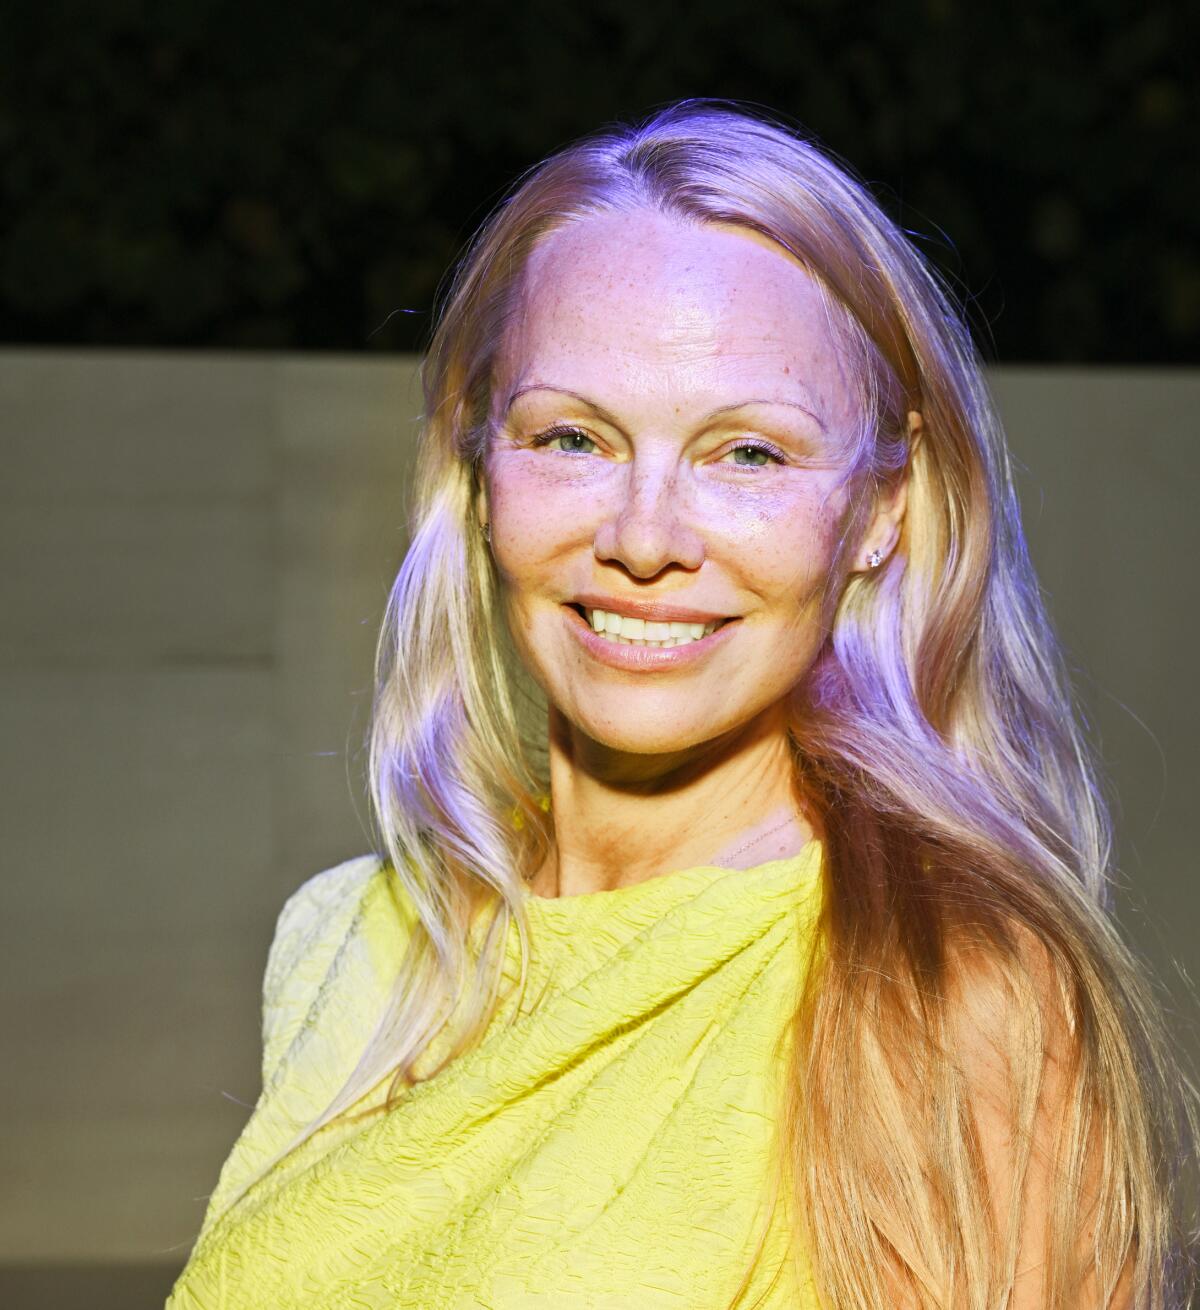 A woman with long blond hair, without makeup, in a yellow dress.